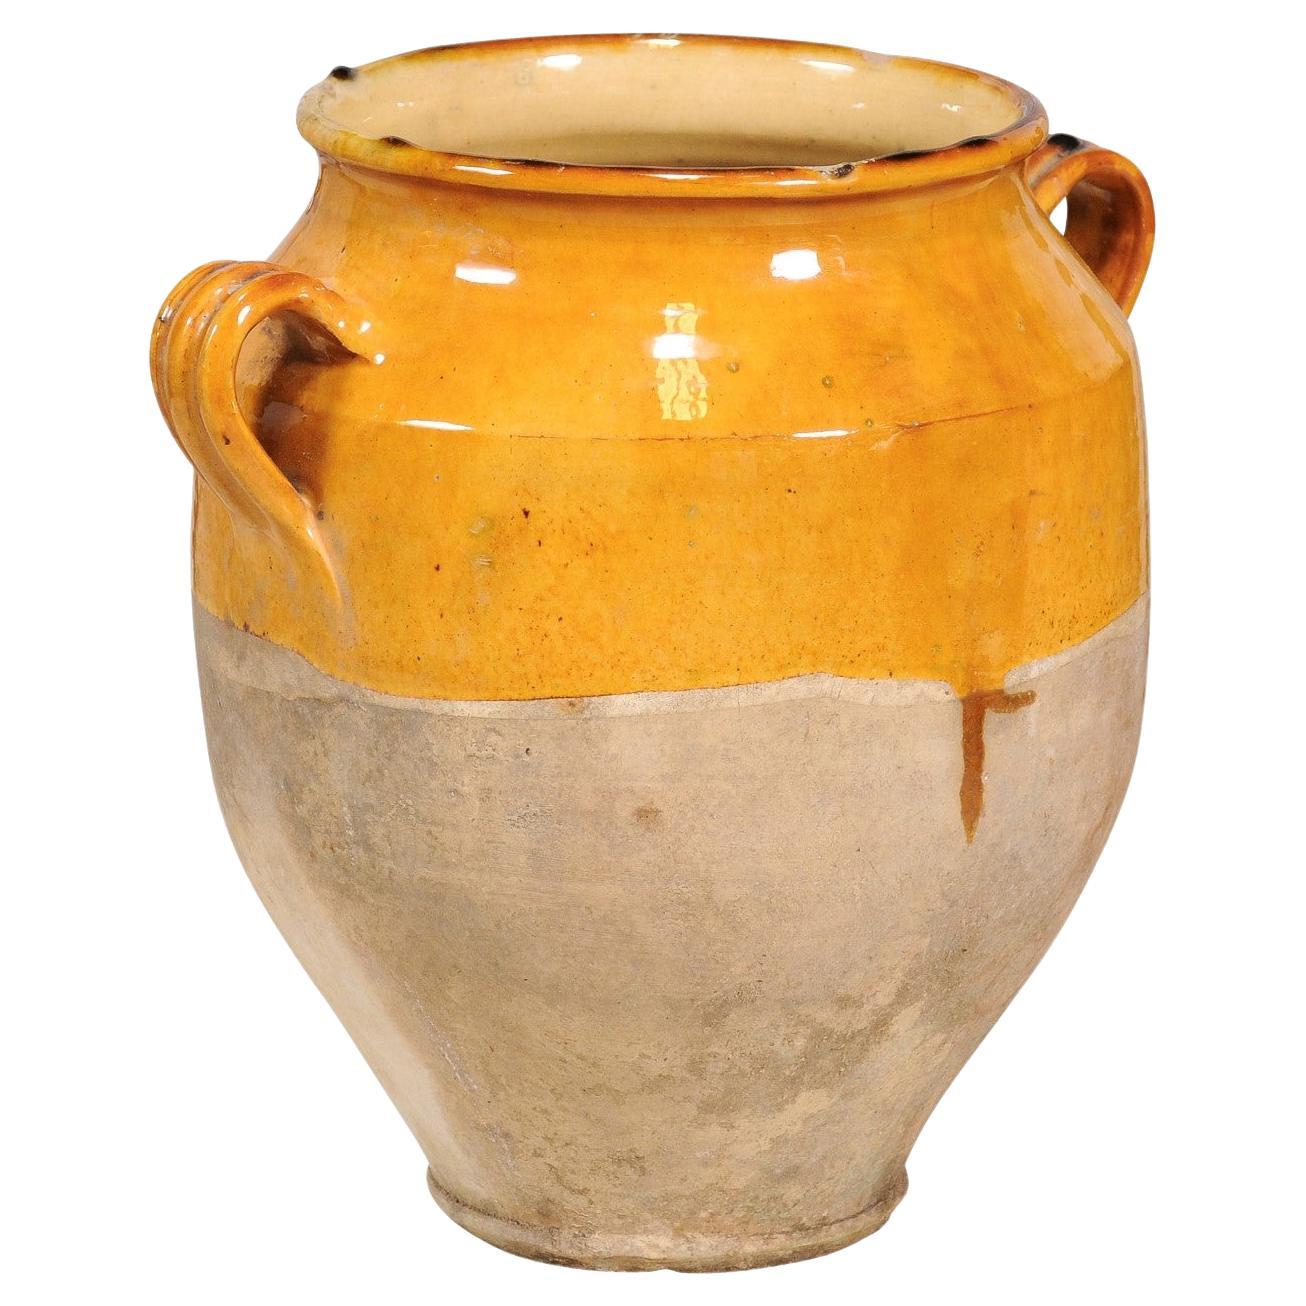 French Provincial Double Handled Pot à Confit with Yellow Glaze, 19th Century